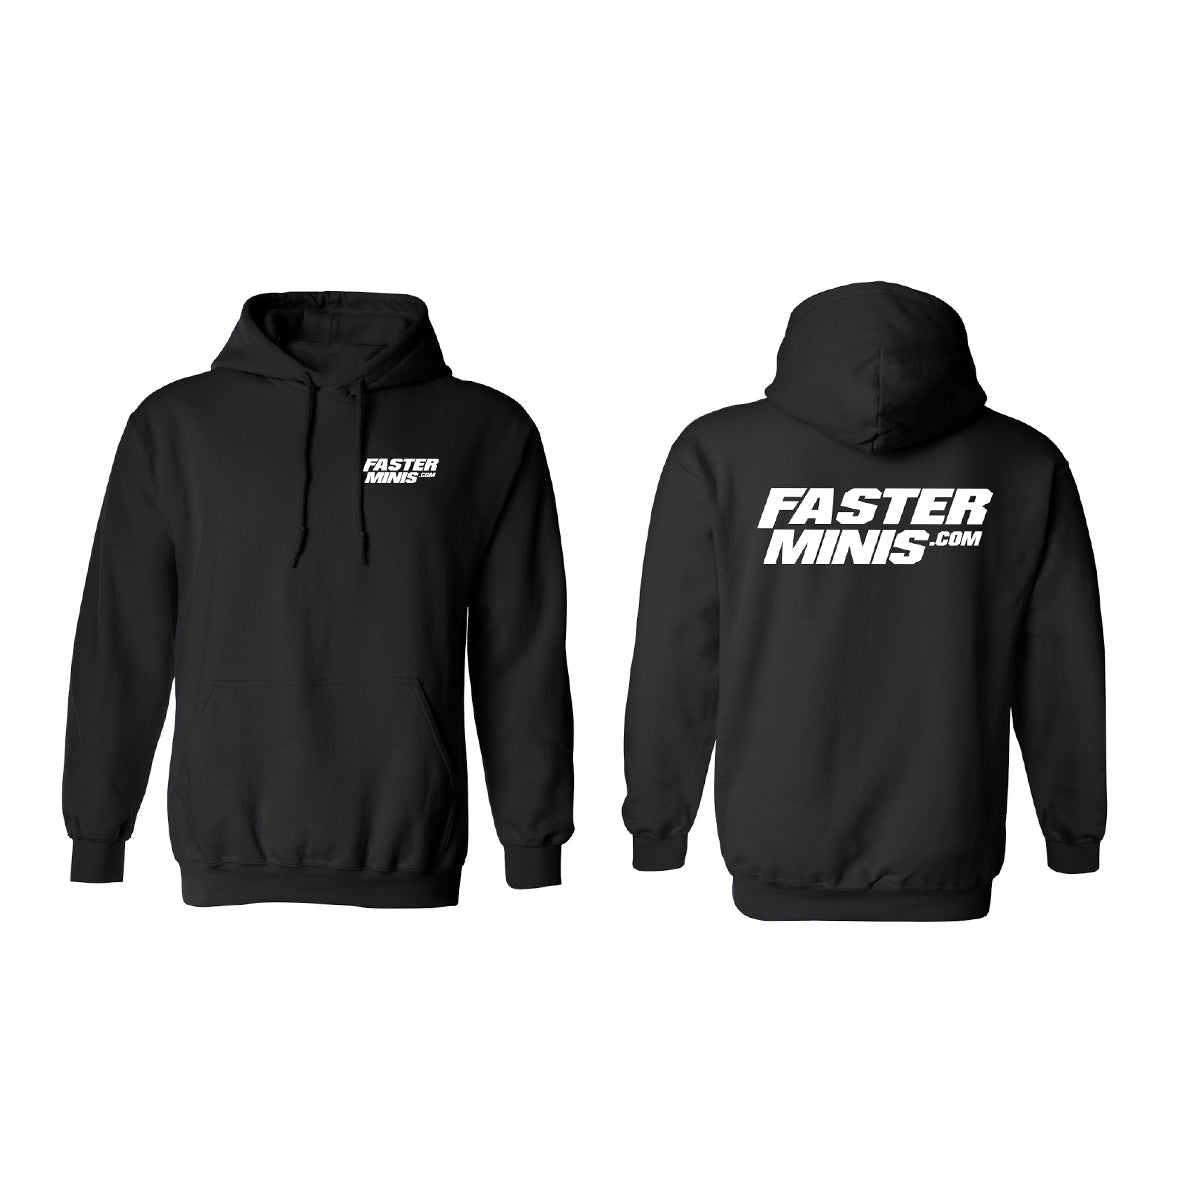 Faster Minis "Classic" Hoodie